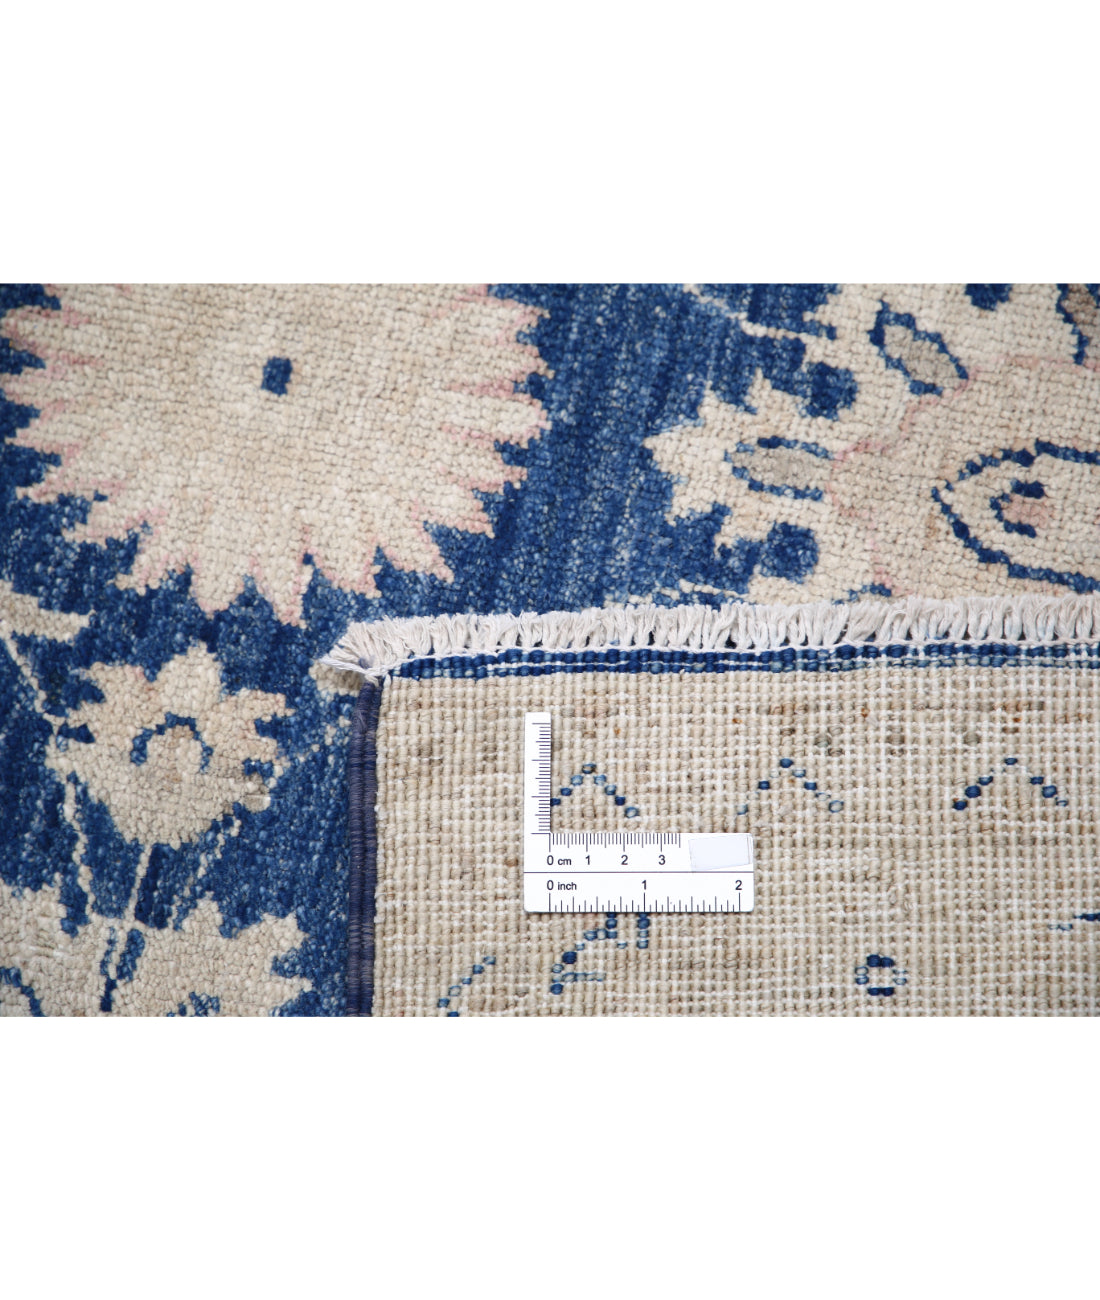 Hand Knotted Serenity Wool Rug - 3'11'' x 10'5'' 3'11'' x 10'5'' (118 X 313) / Blue / Ivory